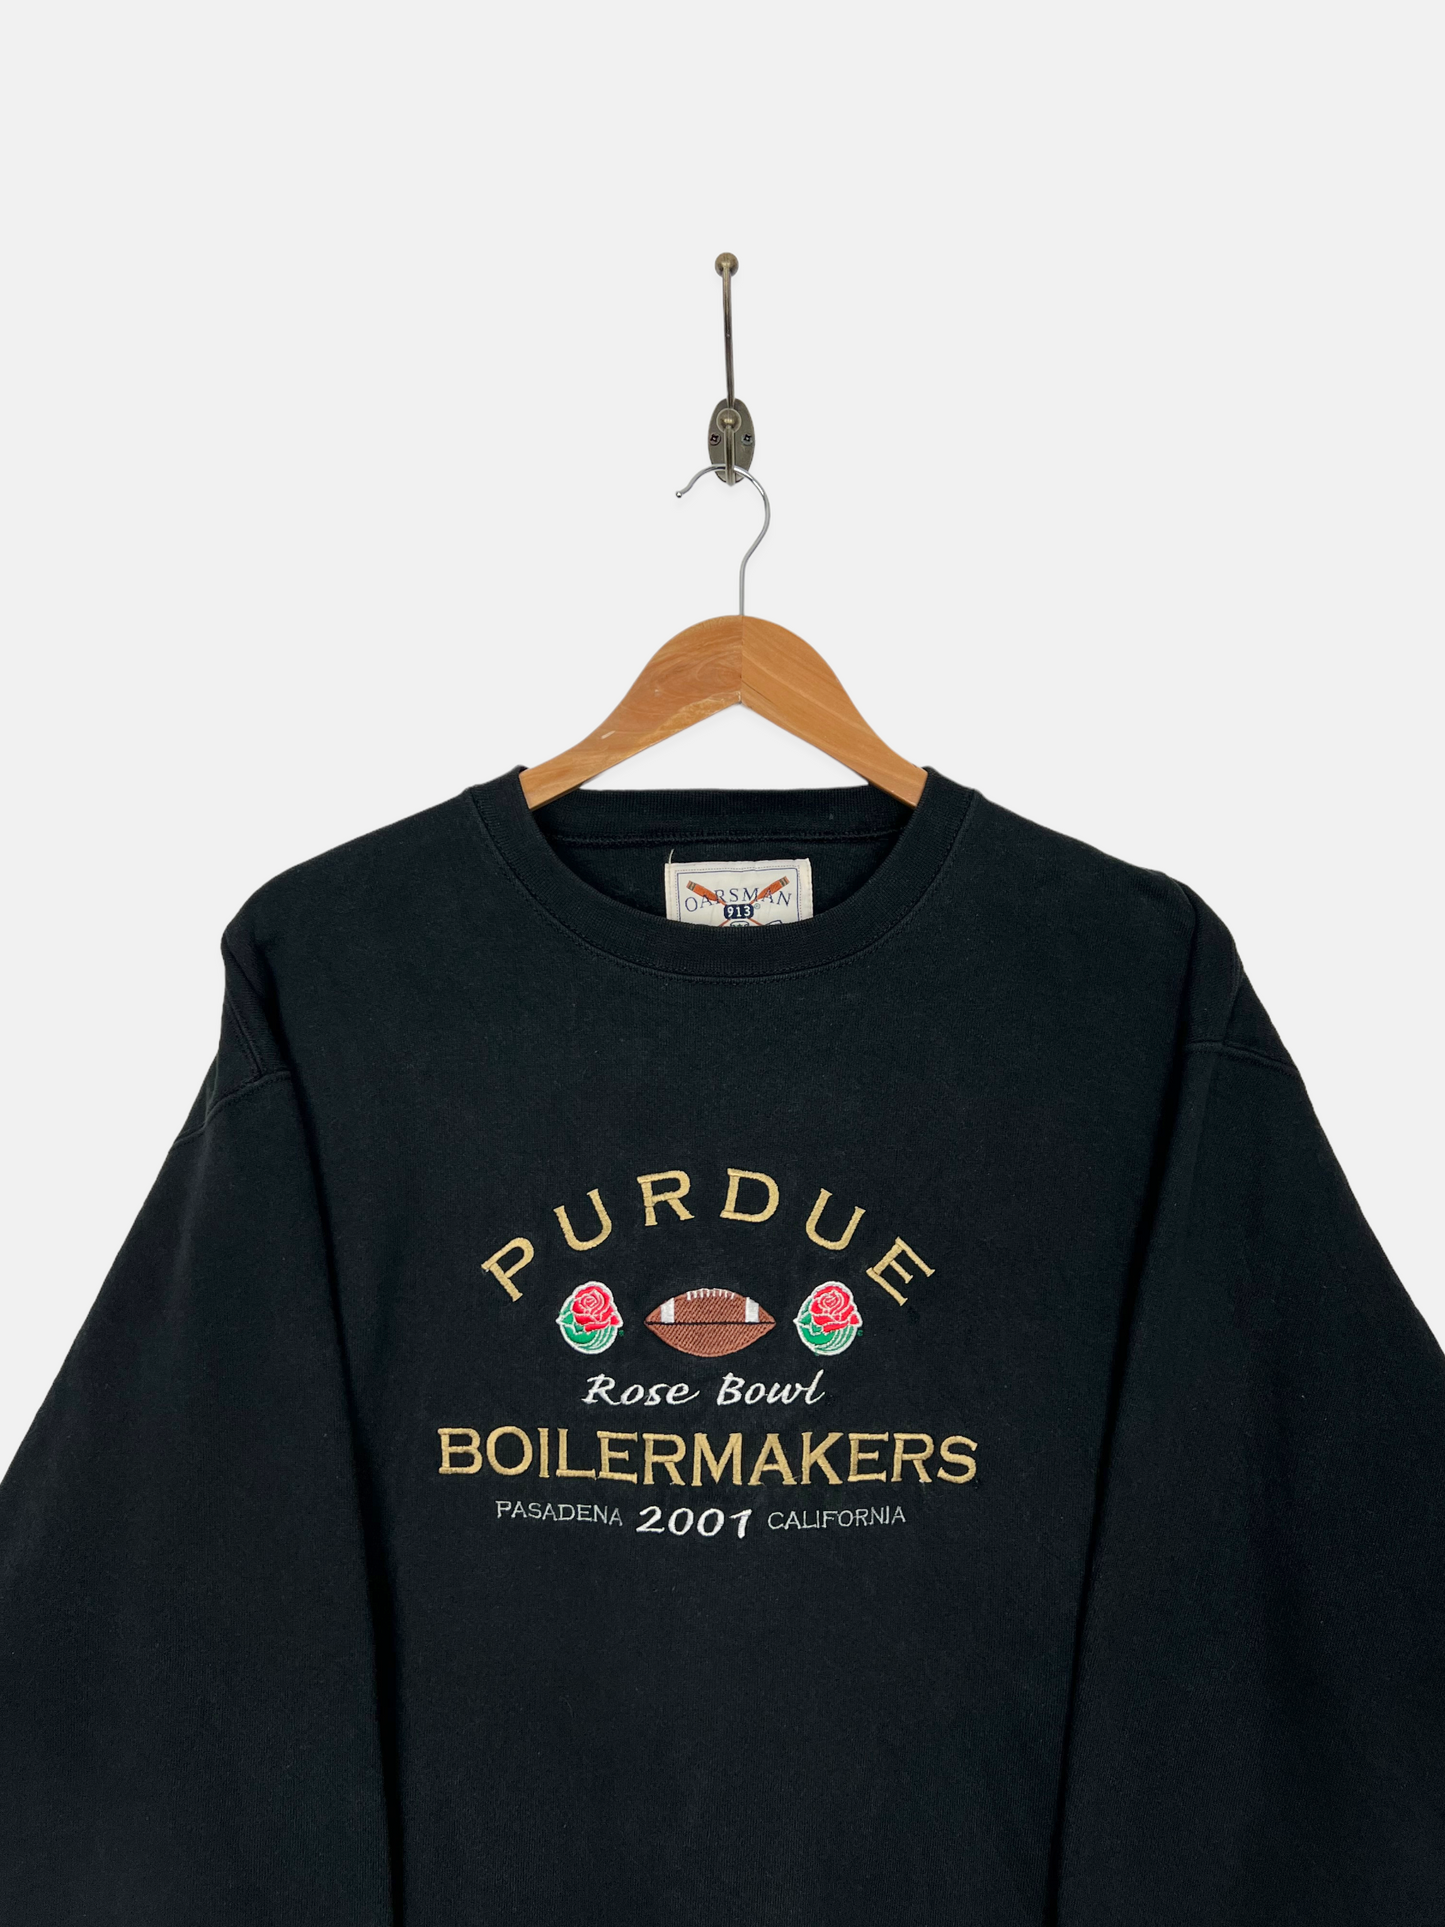 Purdue Boilermakers USA Made Embroidered Vintage Sweatshirt Size M-L